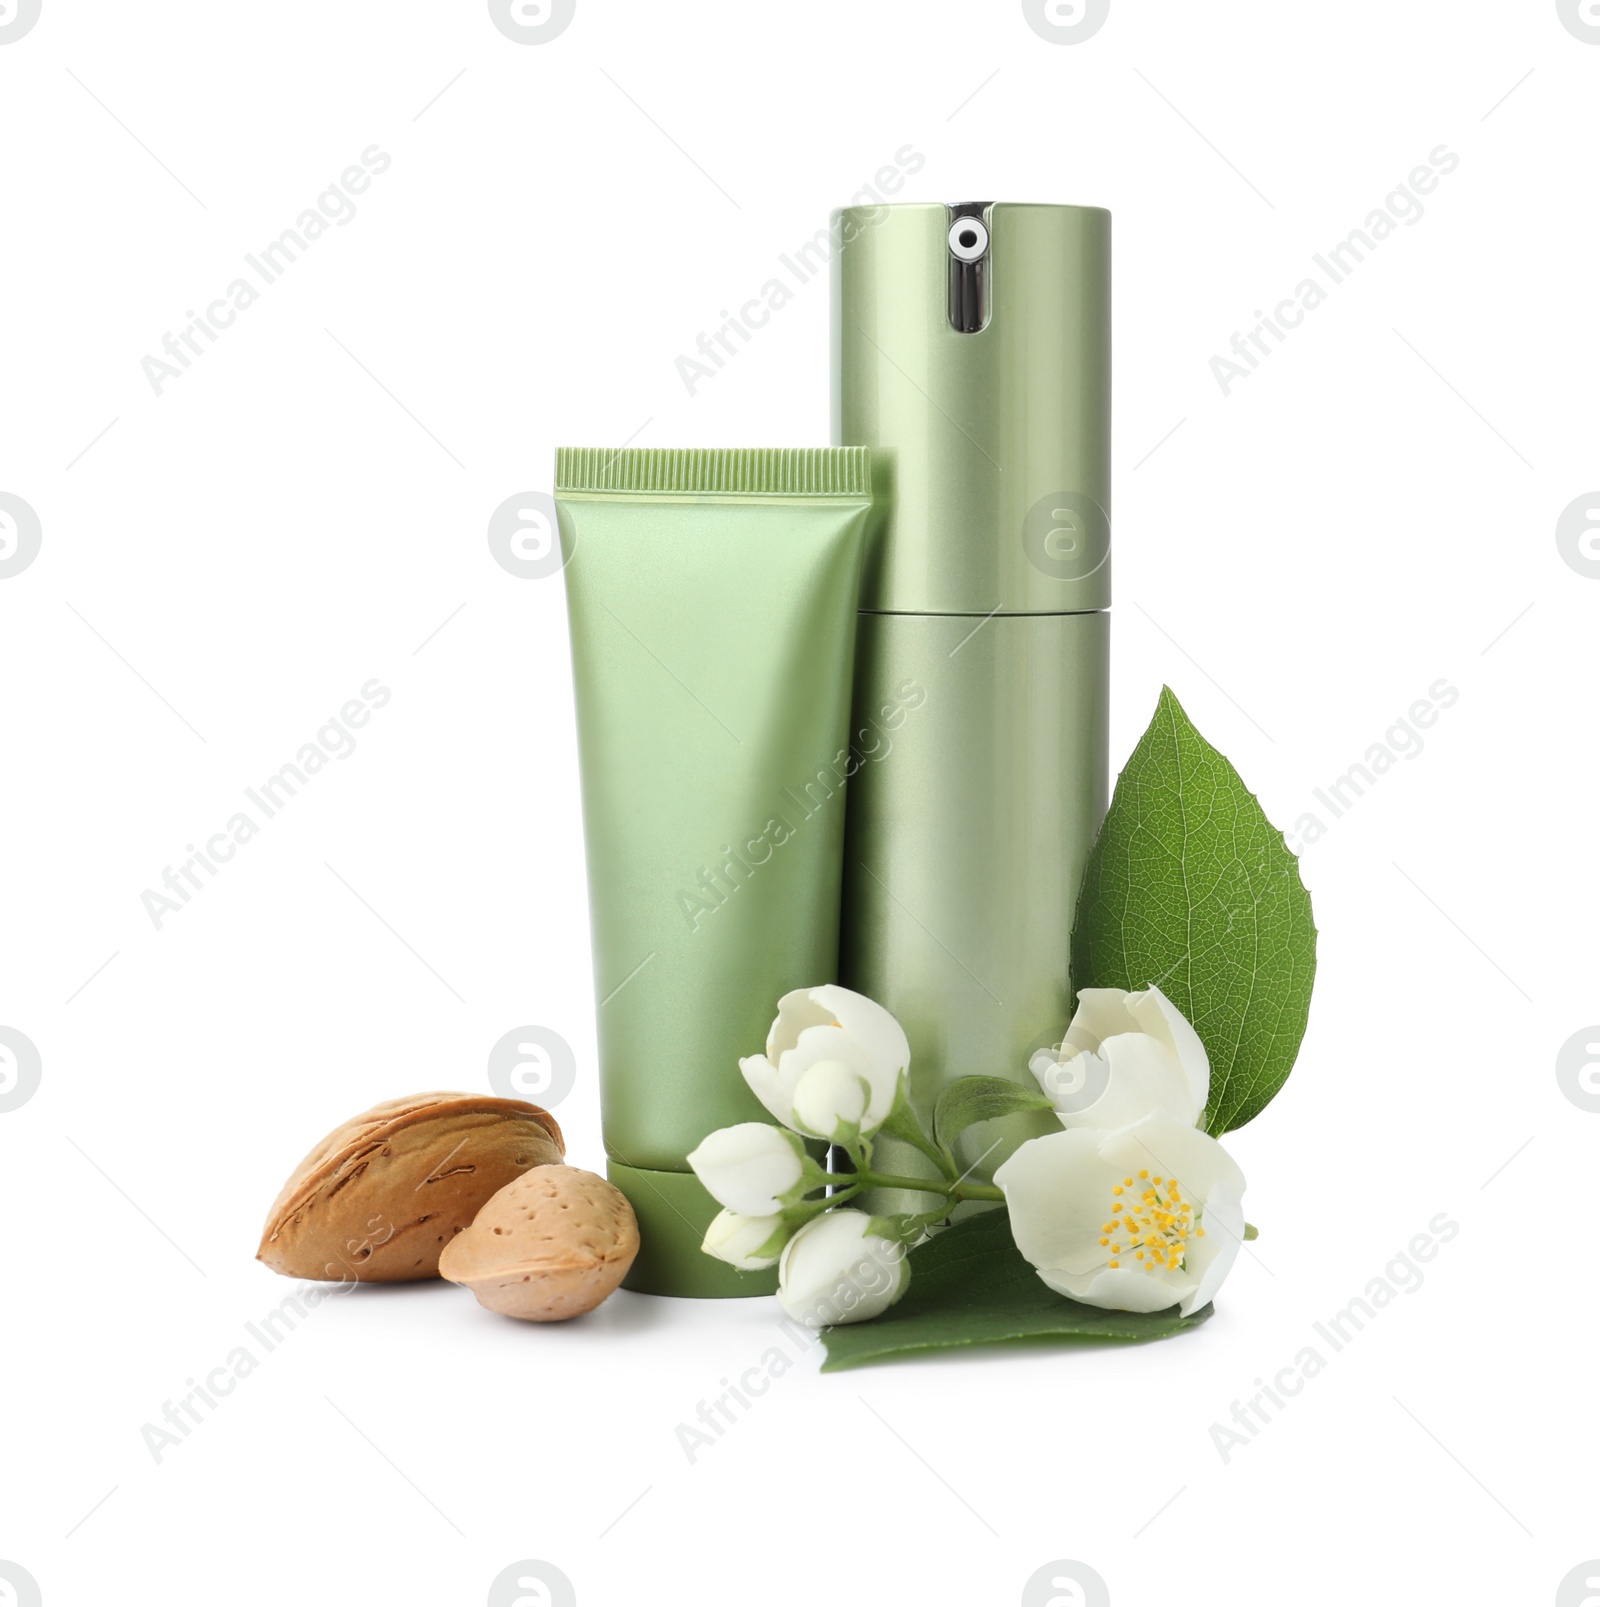 Photo of Cosmetic products, almond nuts and flowers on white background